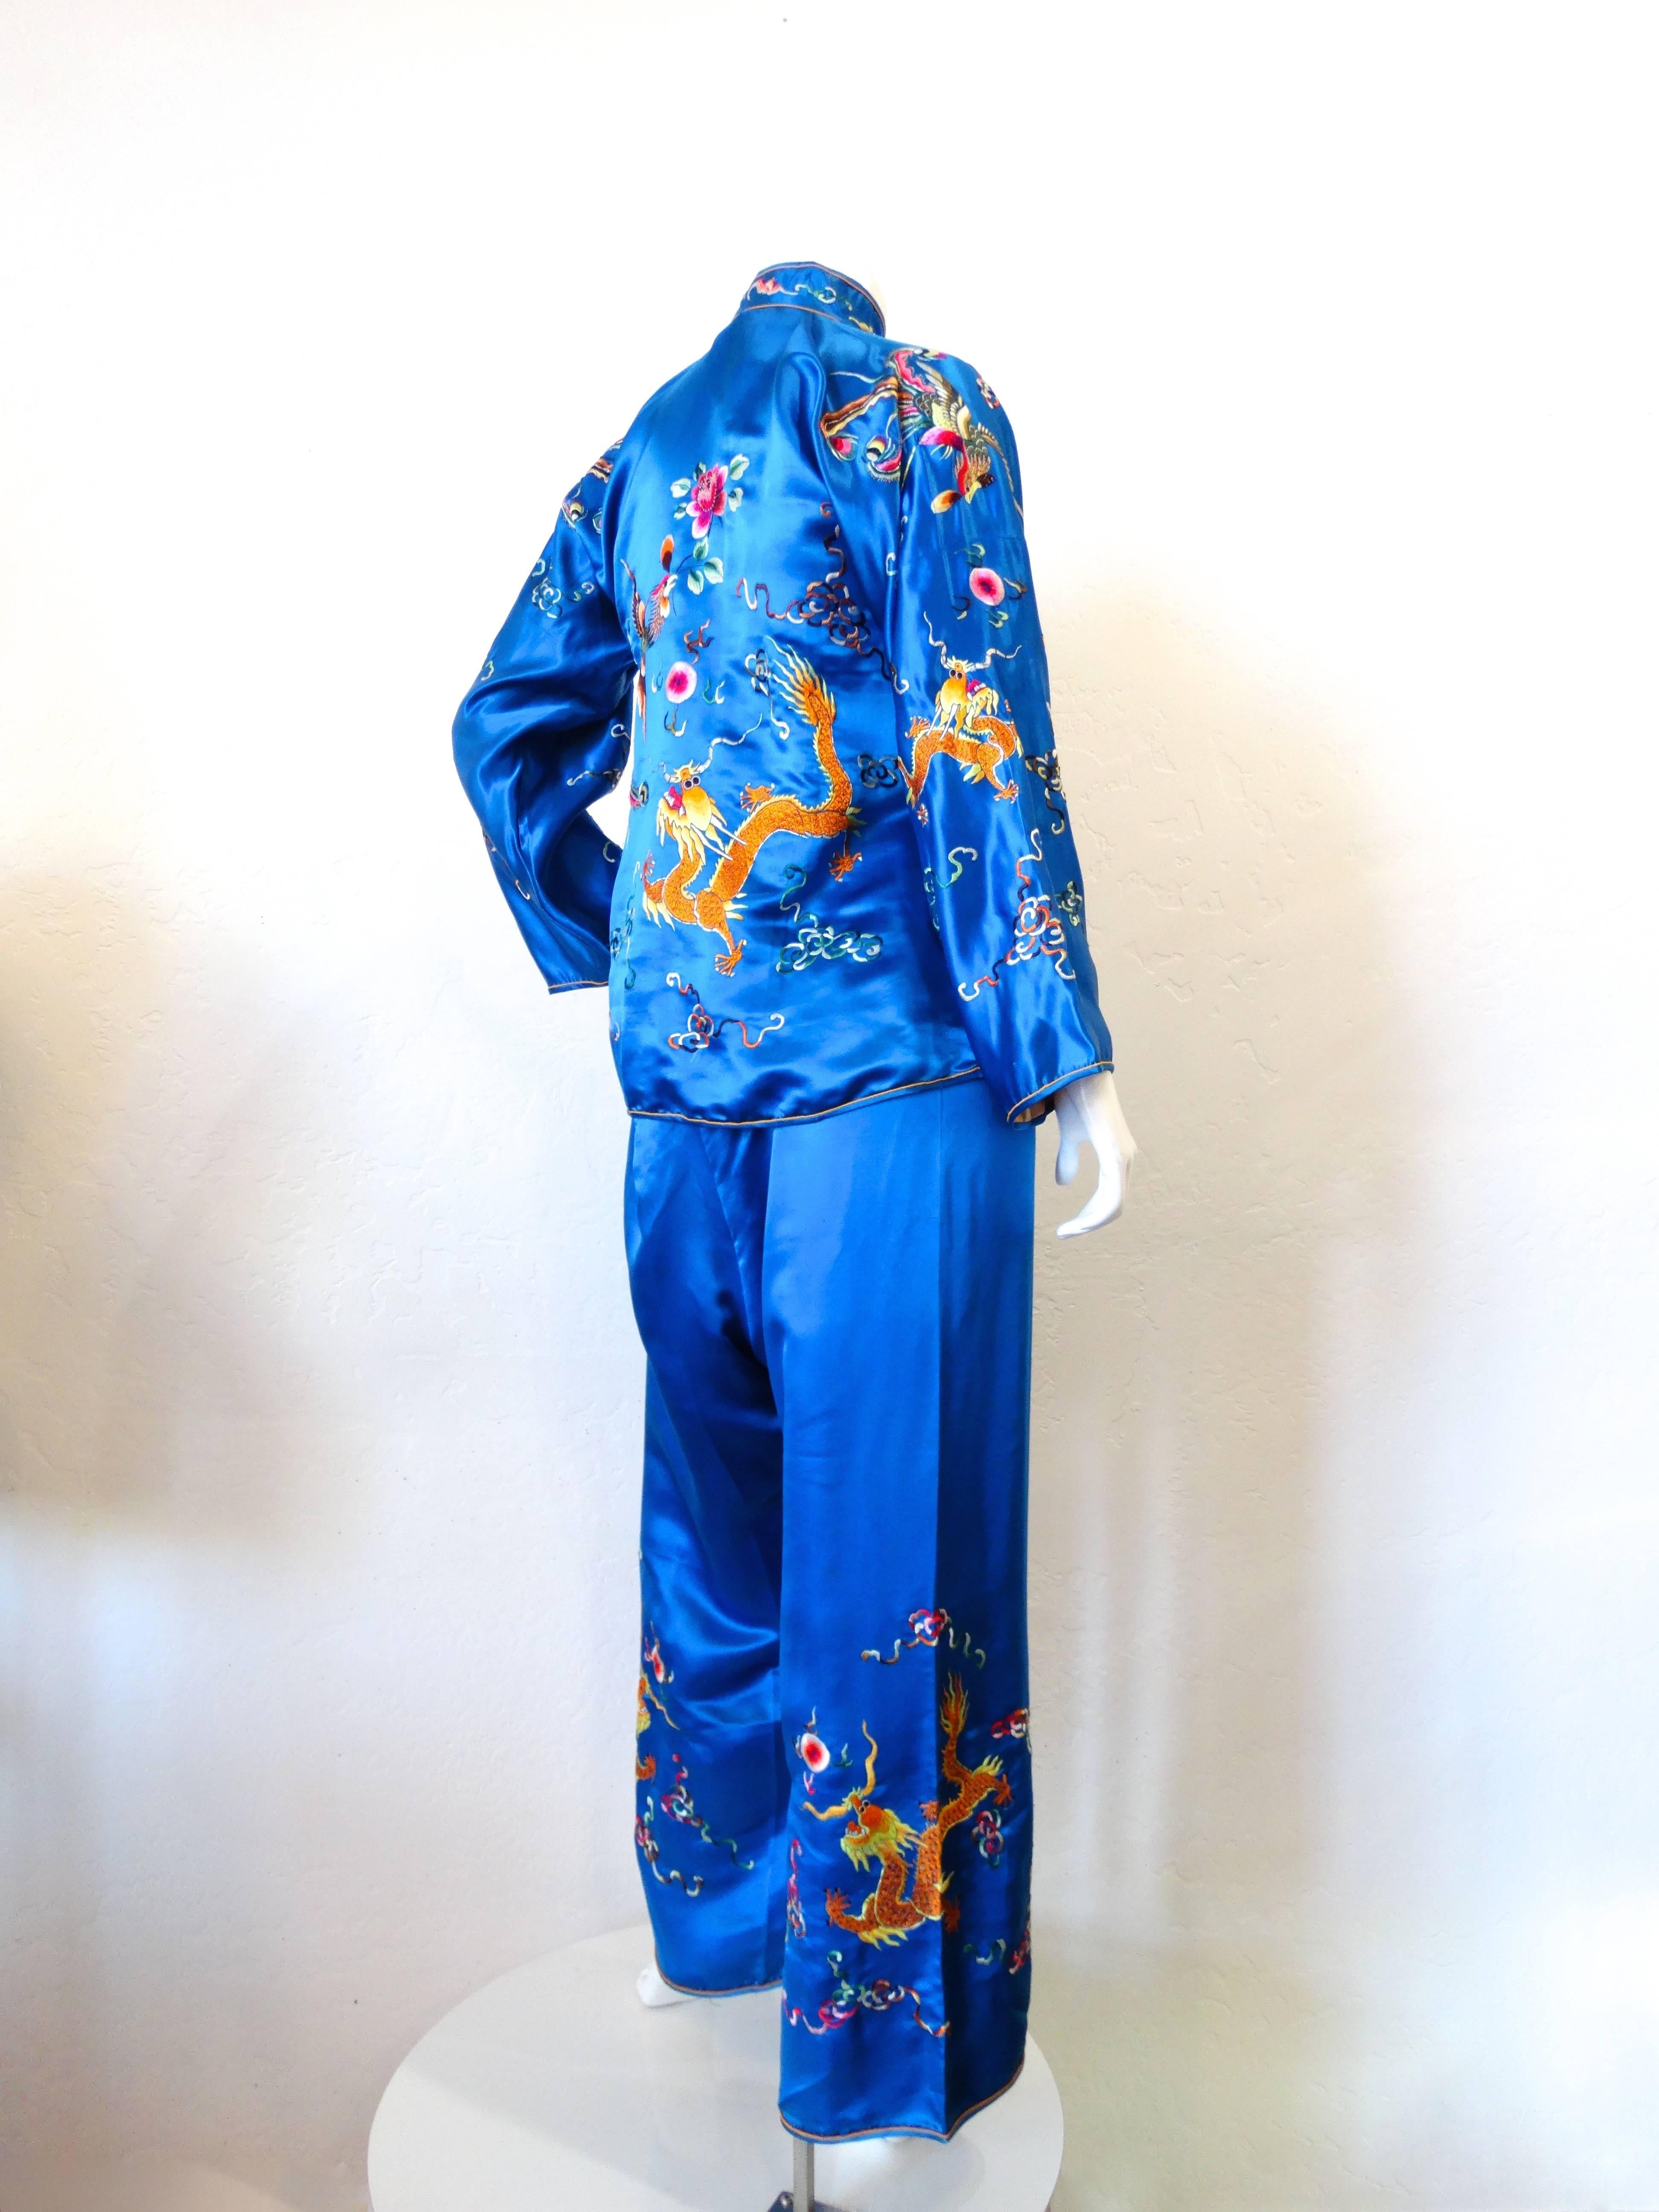 A beautiful Chinese satin pajama set in a brilliant blue silk! Embroidered with multicolored dragons, and the phoenix bird with floral motifs- this set looks incredible together or as separates! Fully lined interior in a peachy colored silk. Top